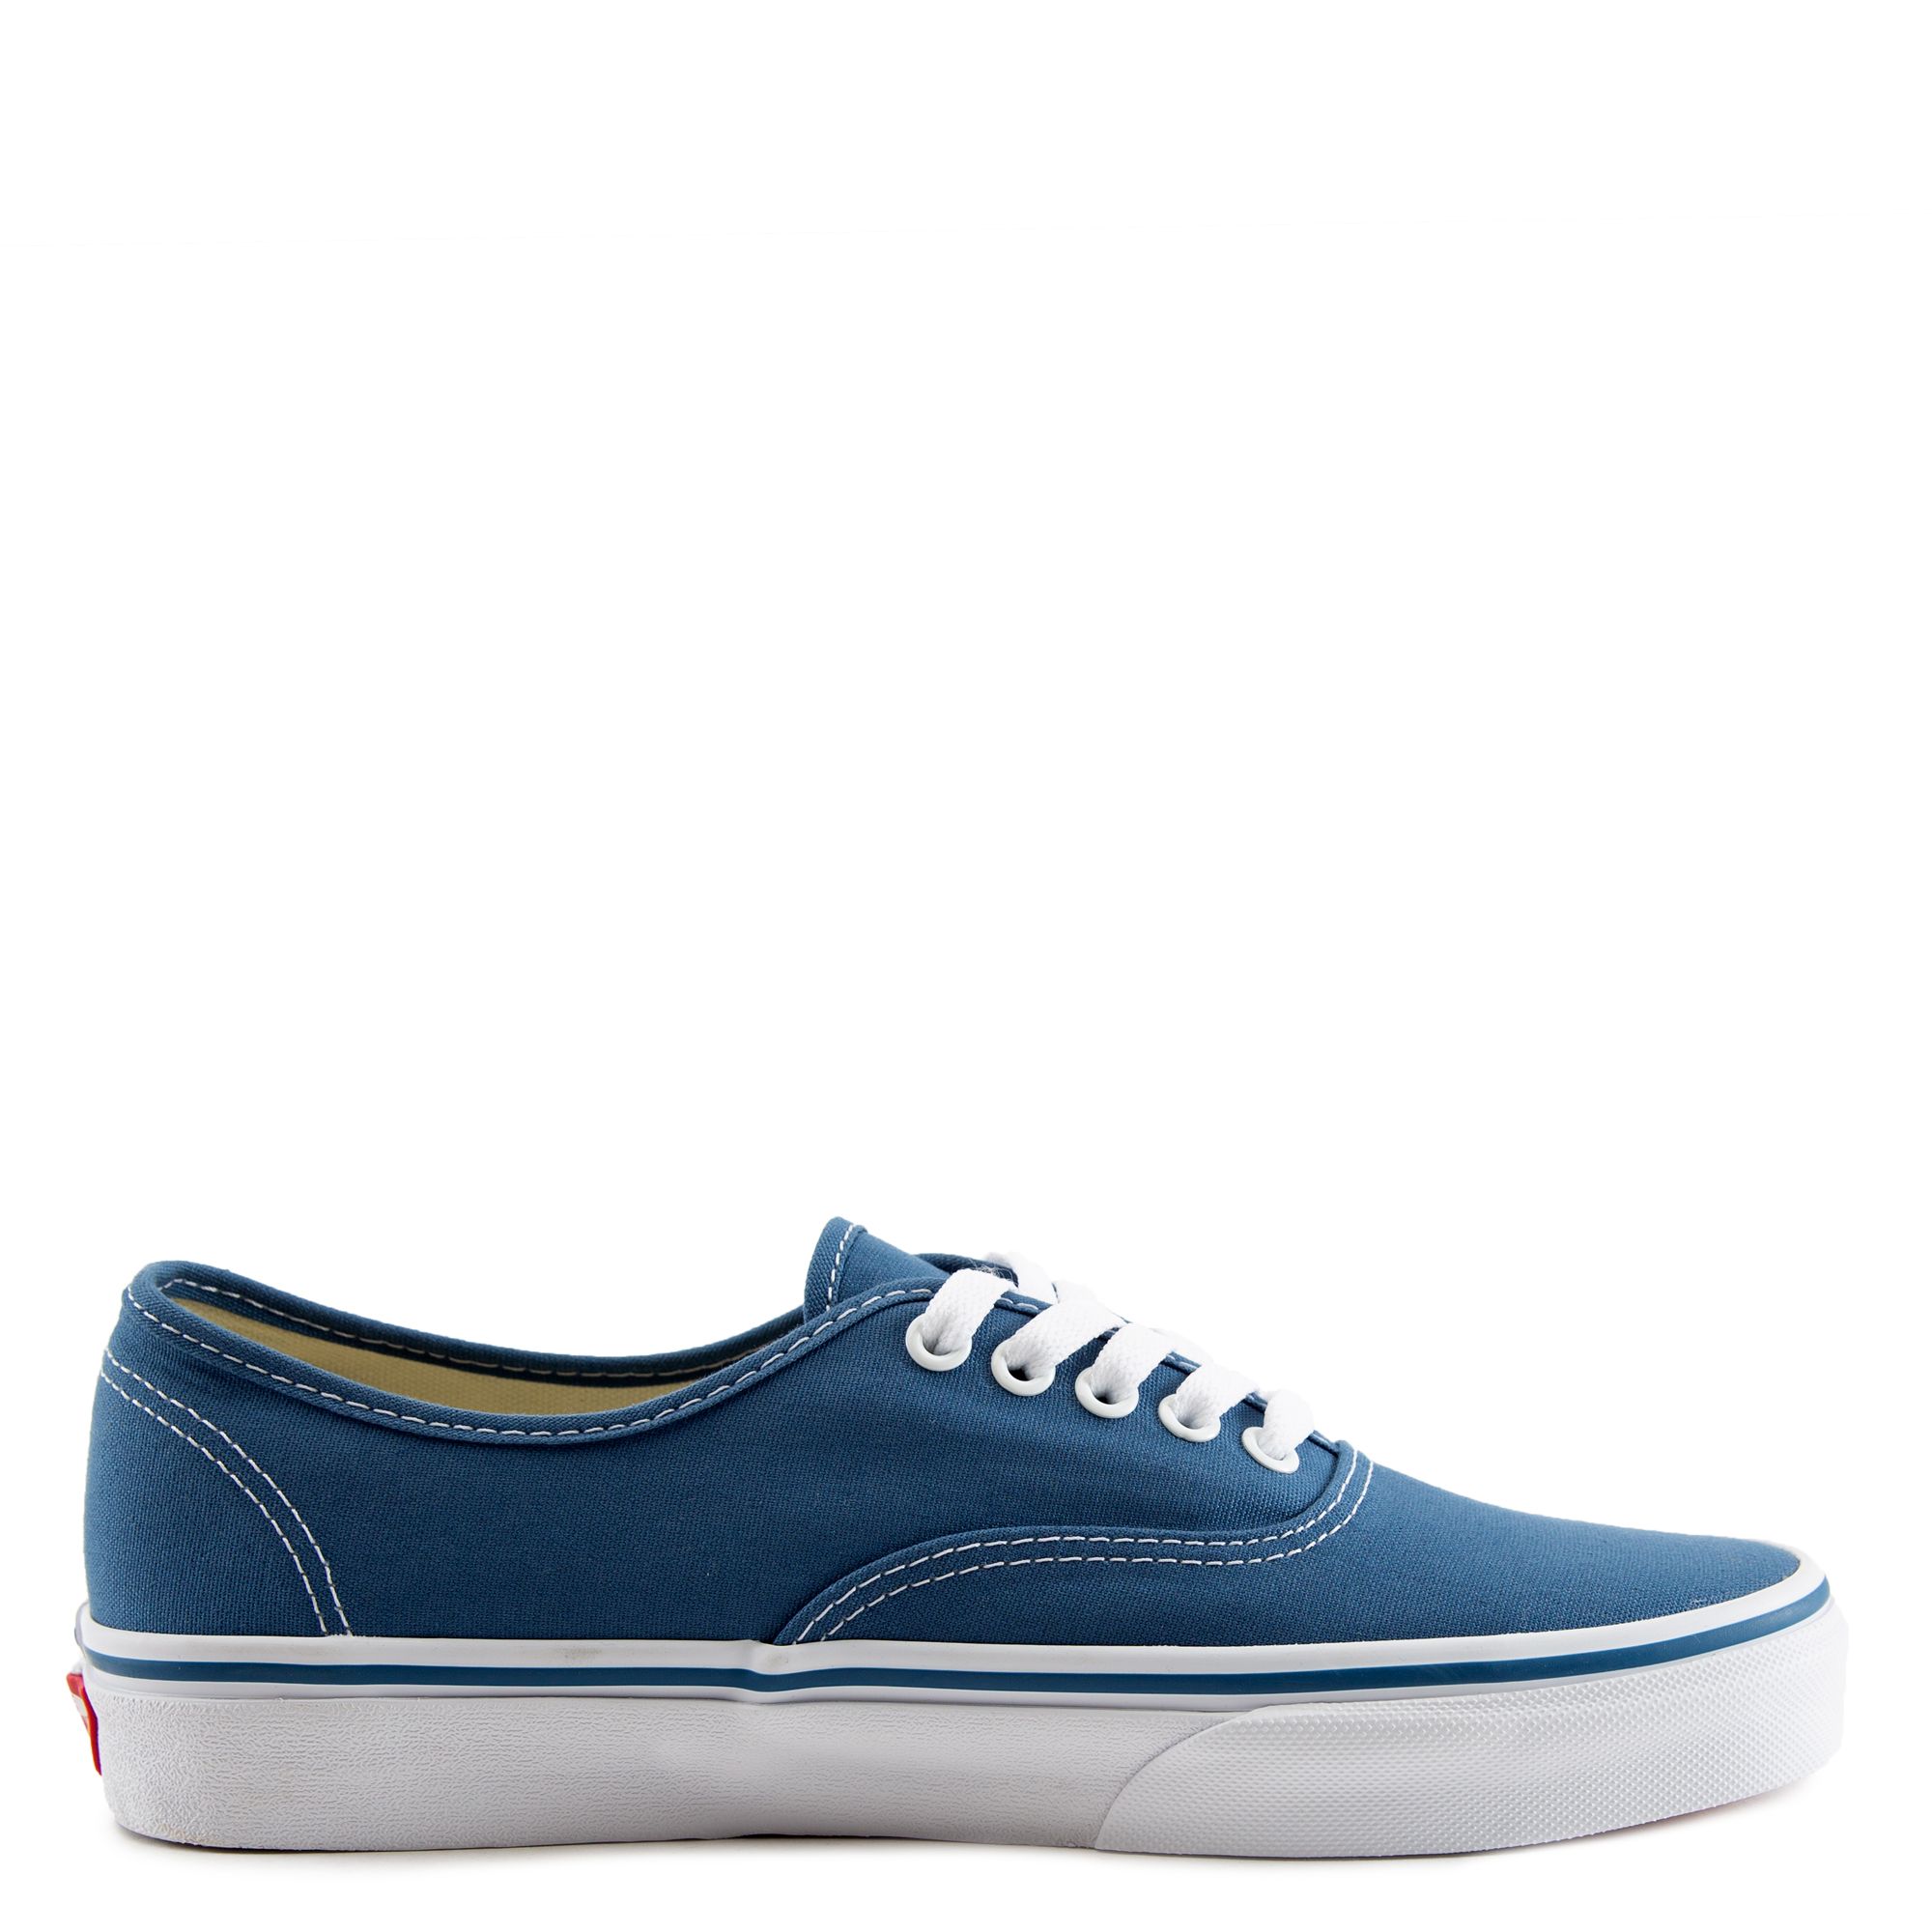 VANS Authentic VN000EE3NVY - Shiekh